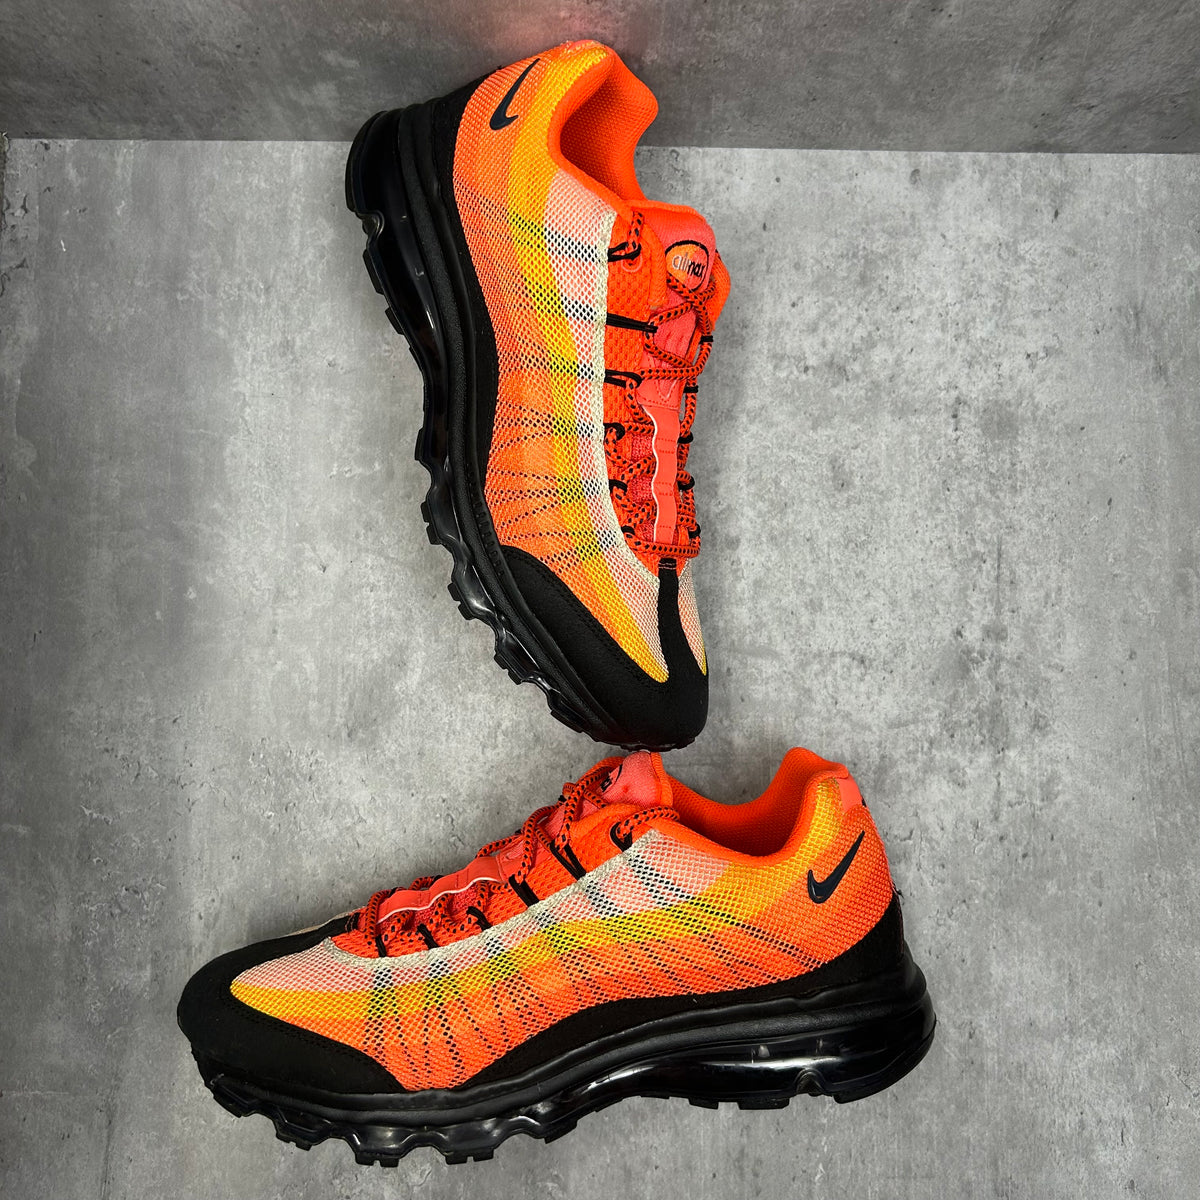 Nike Airmax 95 Sunset Flywire